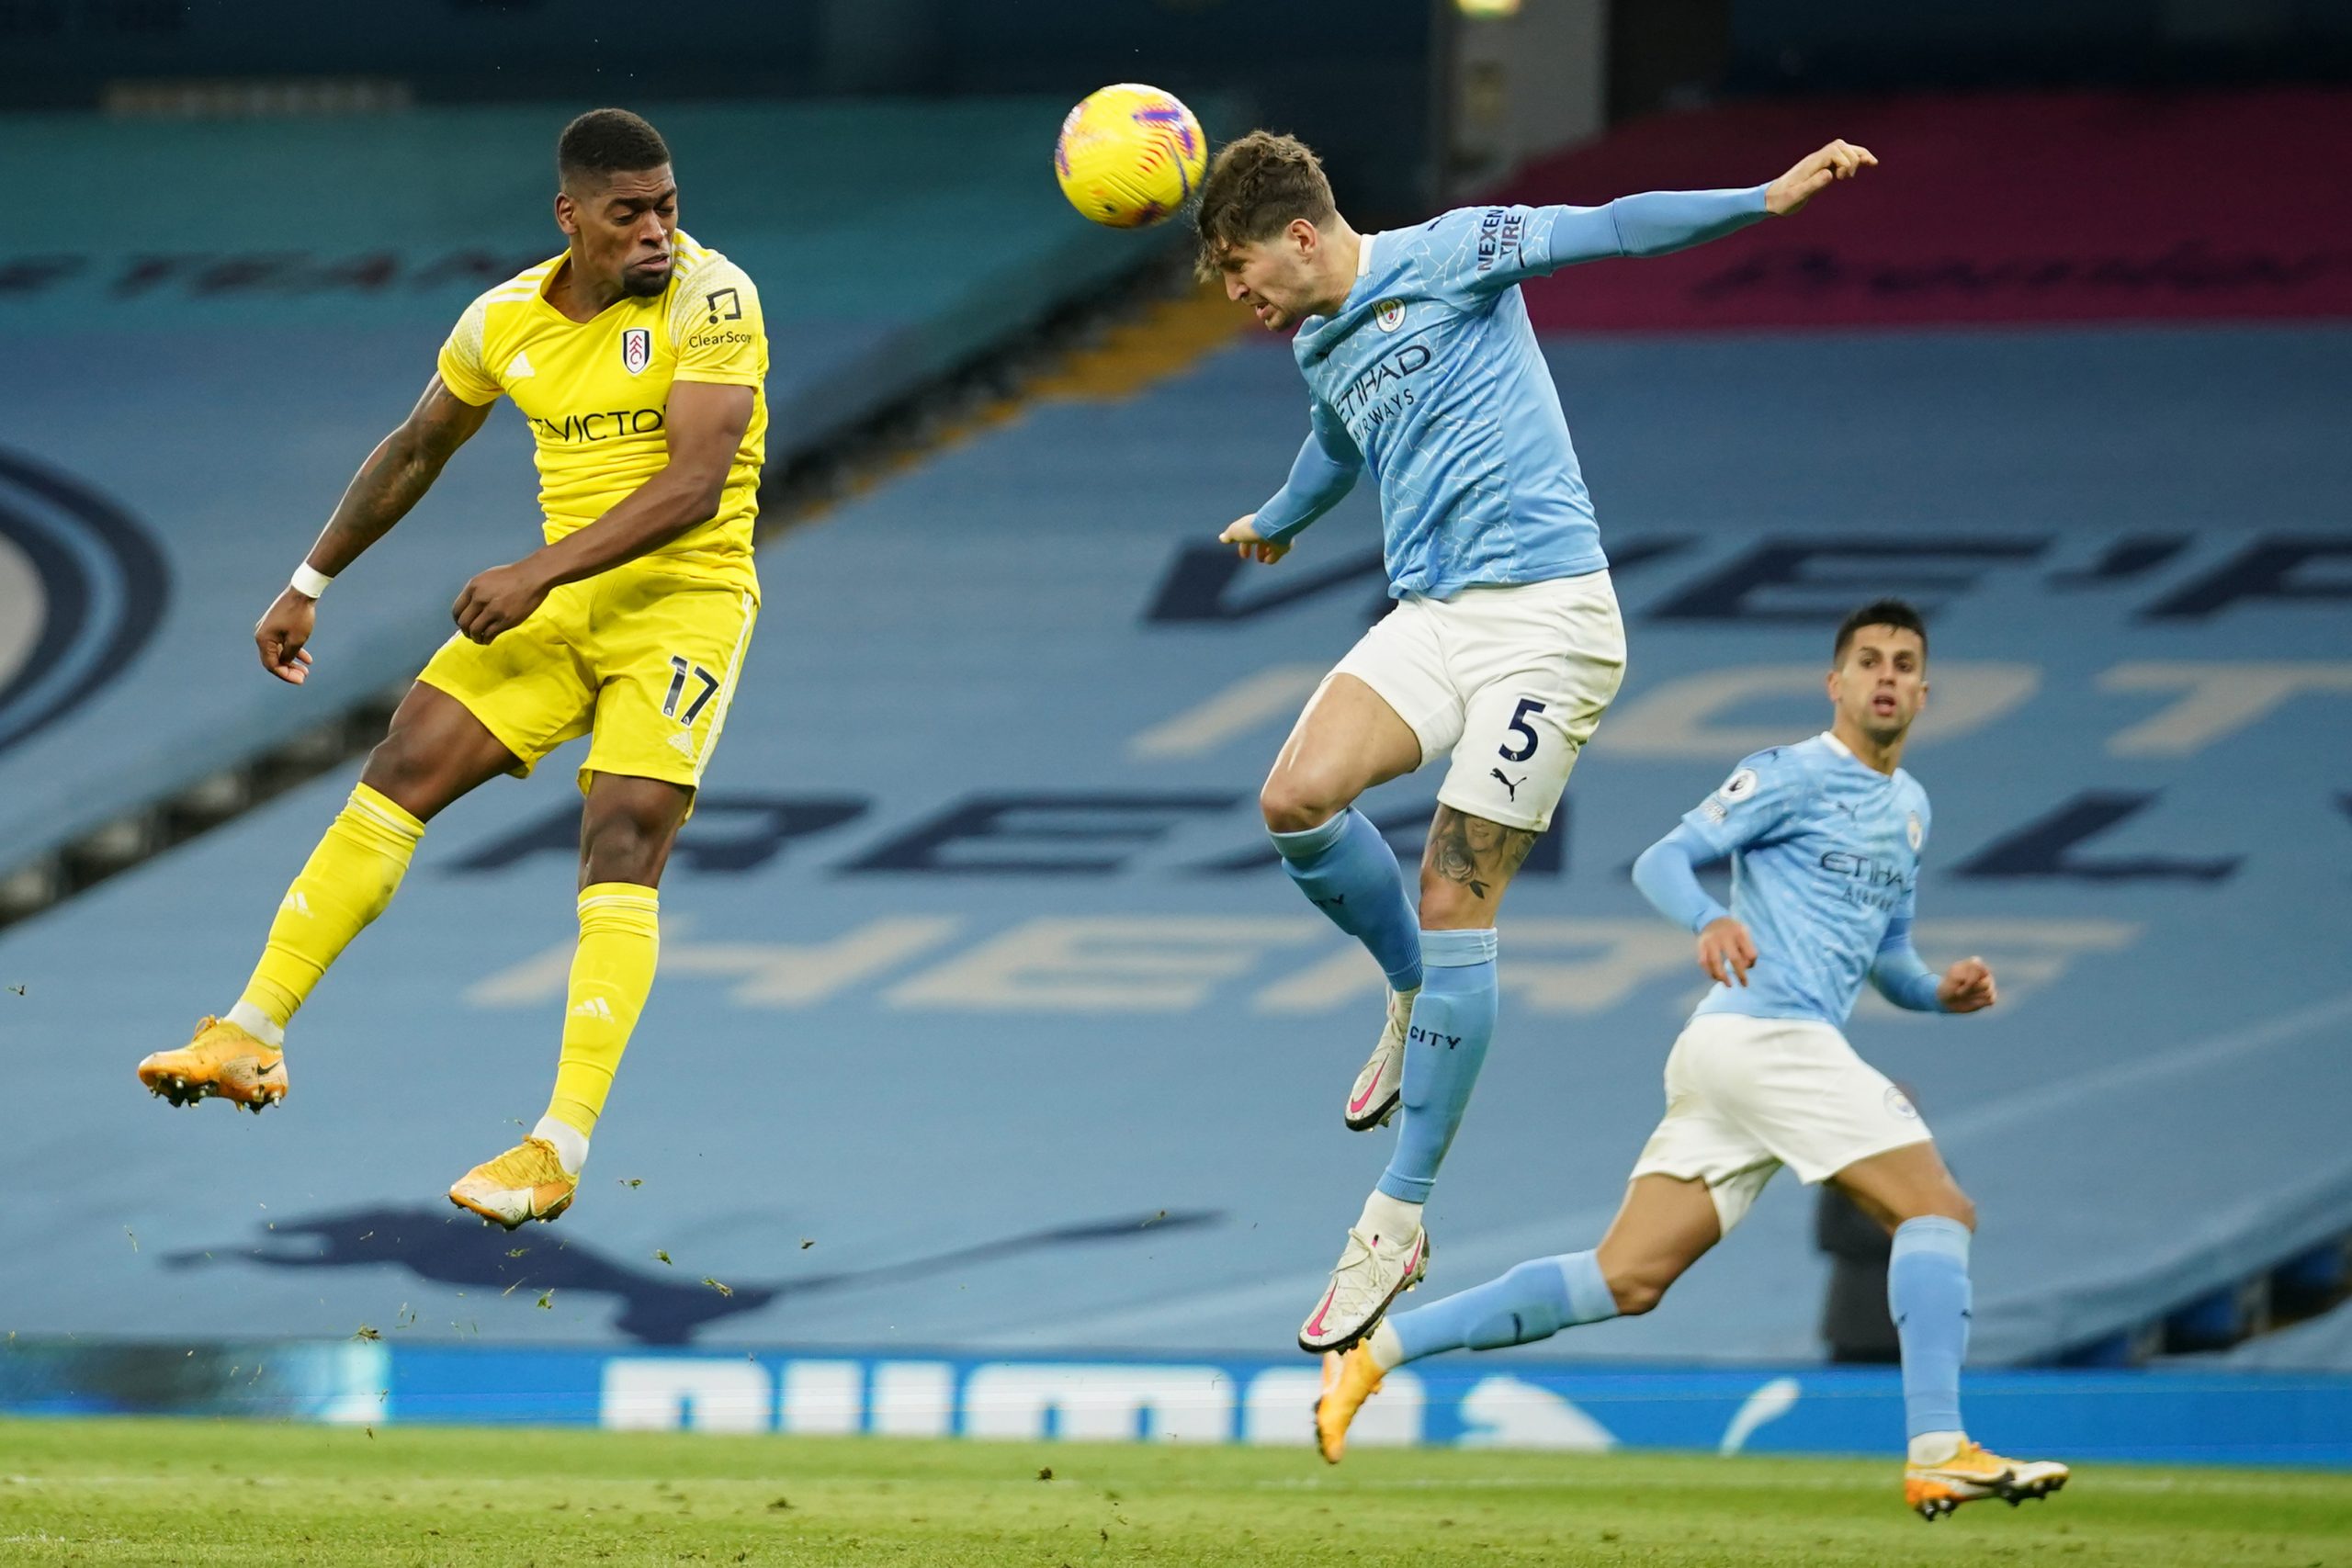 Fulham's Portuguese striker Ivan Cavaleiro (L) vies with Manchester City's English defender John Stones during the English Premier League football match between Manchester City and Fulham at the Etihad Stadium in Manchester, north west England, on December 5, 2020.  (Photo by DAVE THOMPSON/POOL/AFP via Getty Images)